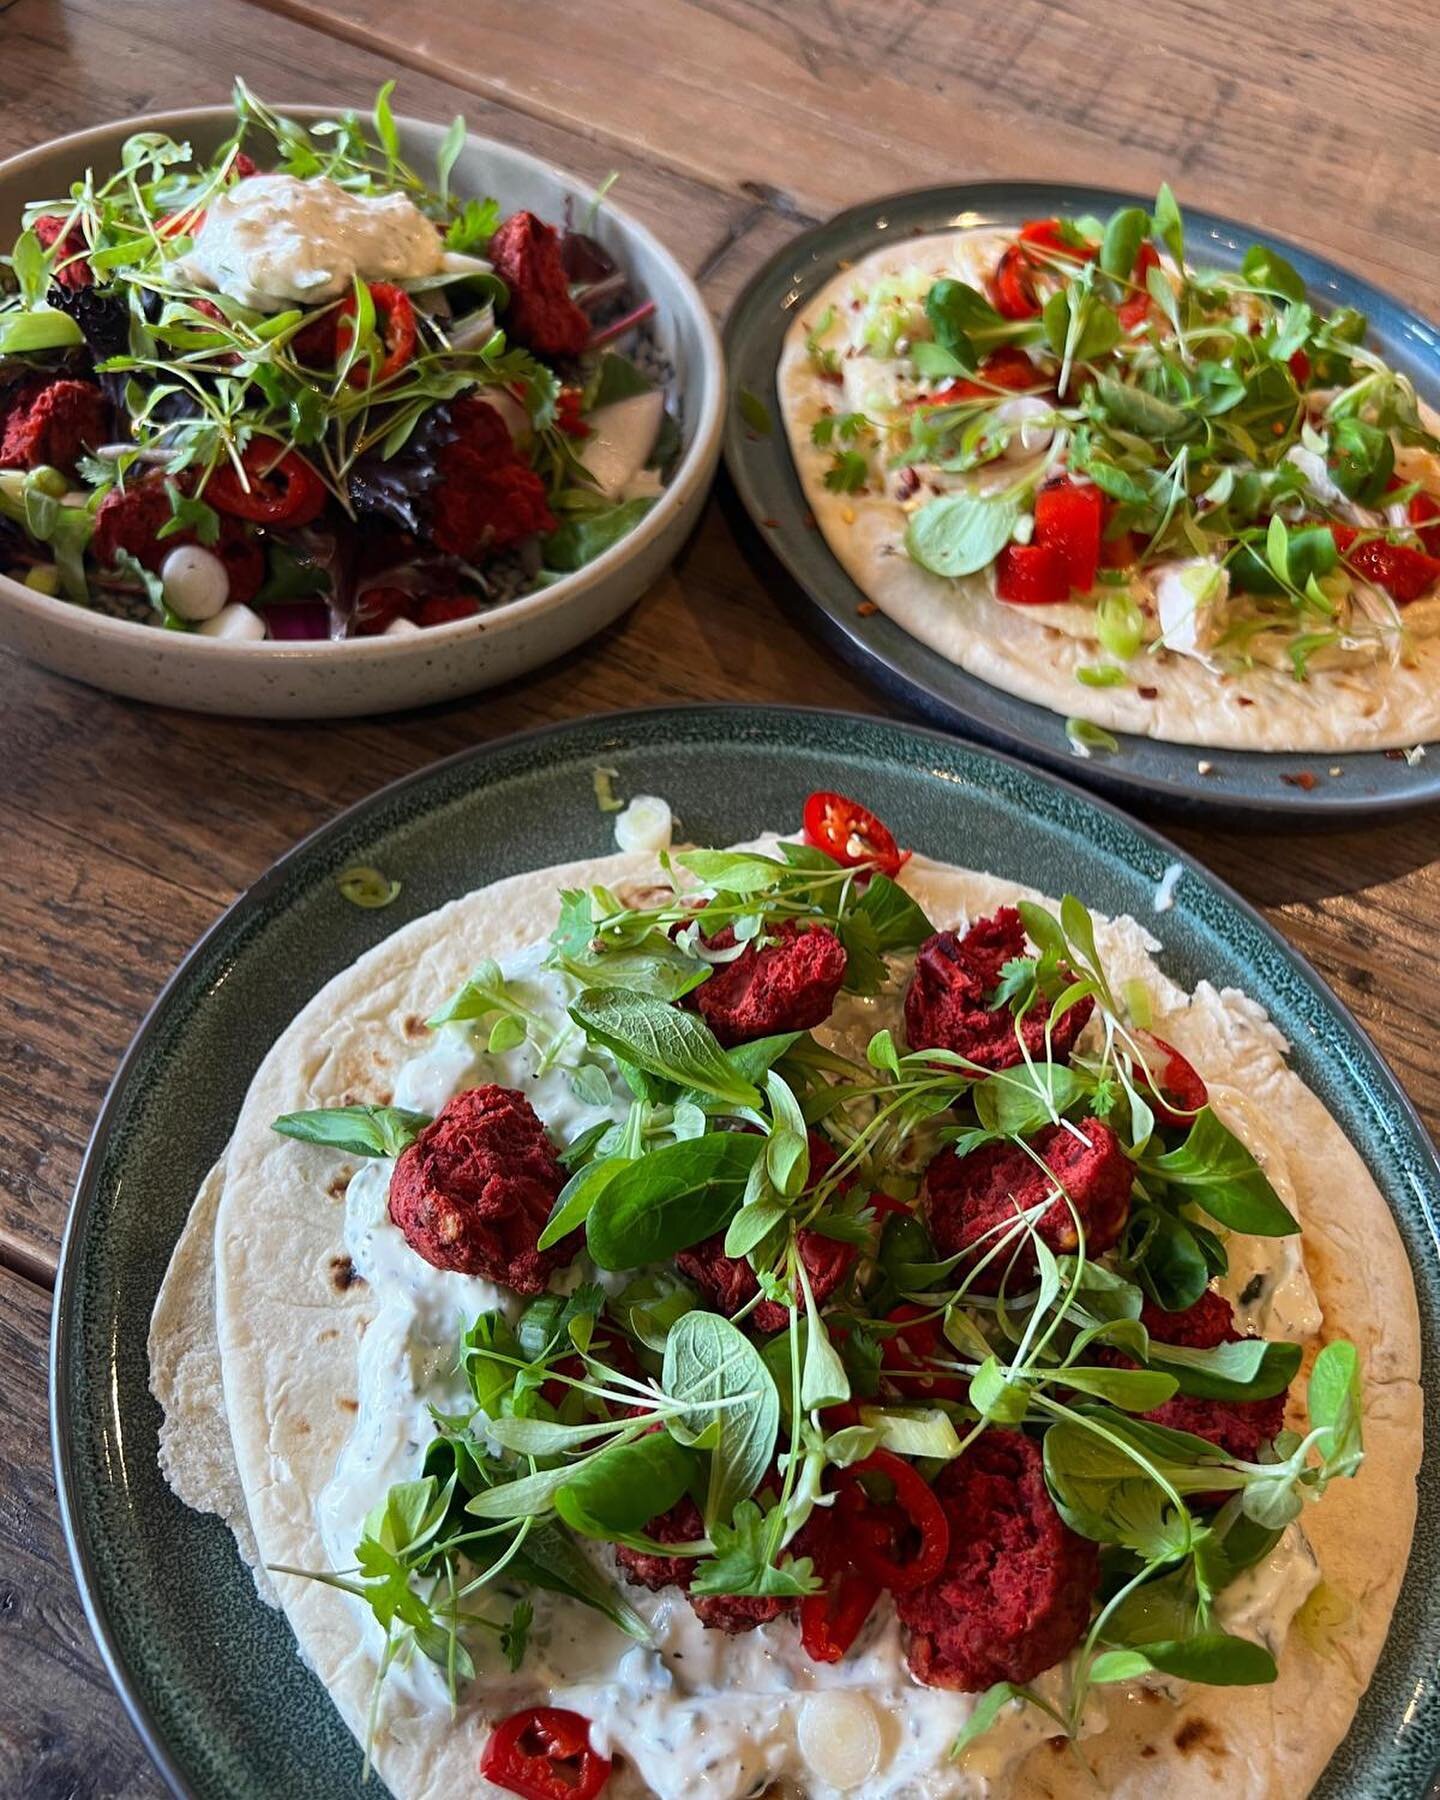 Our brand new delicious summer menu launches today 🍽

Get ready to see a whole lot of colour and taste full of flavour!

Enjoy delicious flat breads, salad bowls and wraps available to dine in or takeaway 🥗

Along with our signature cheese and char